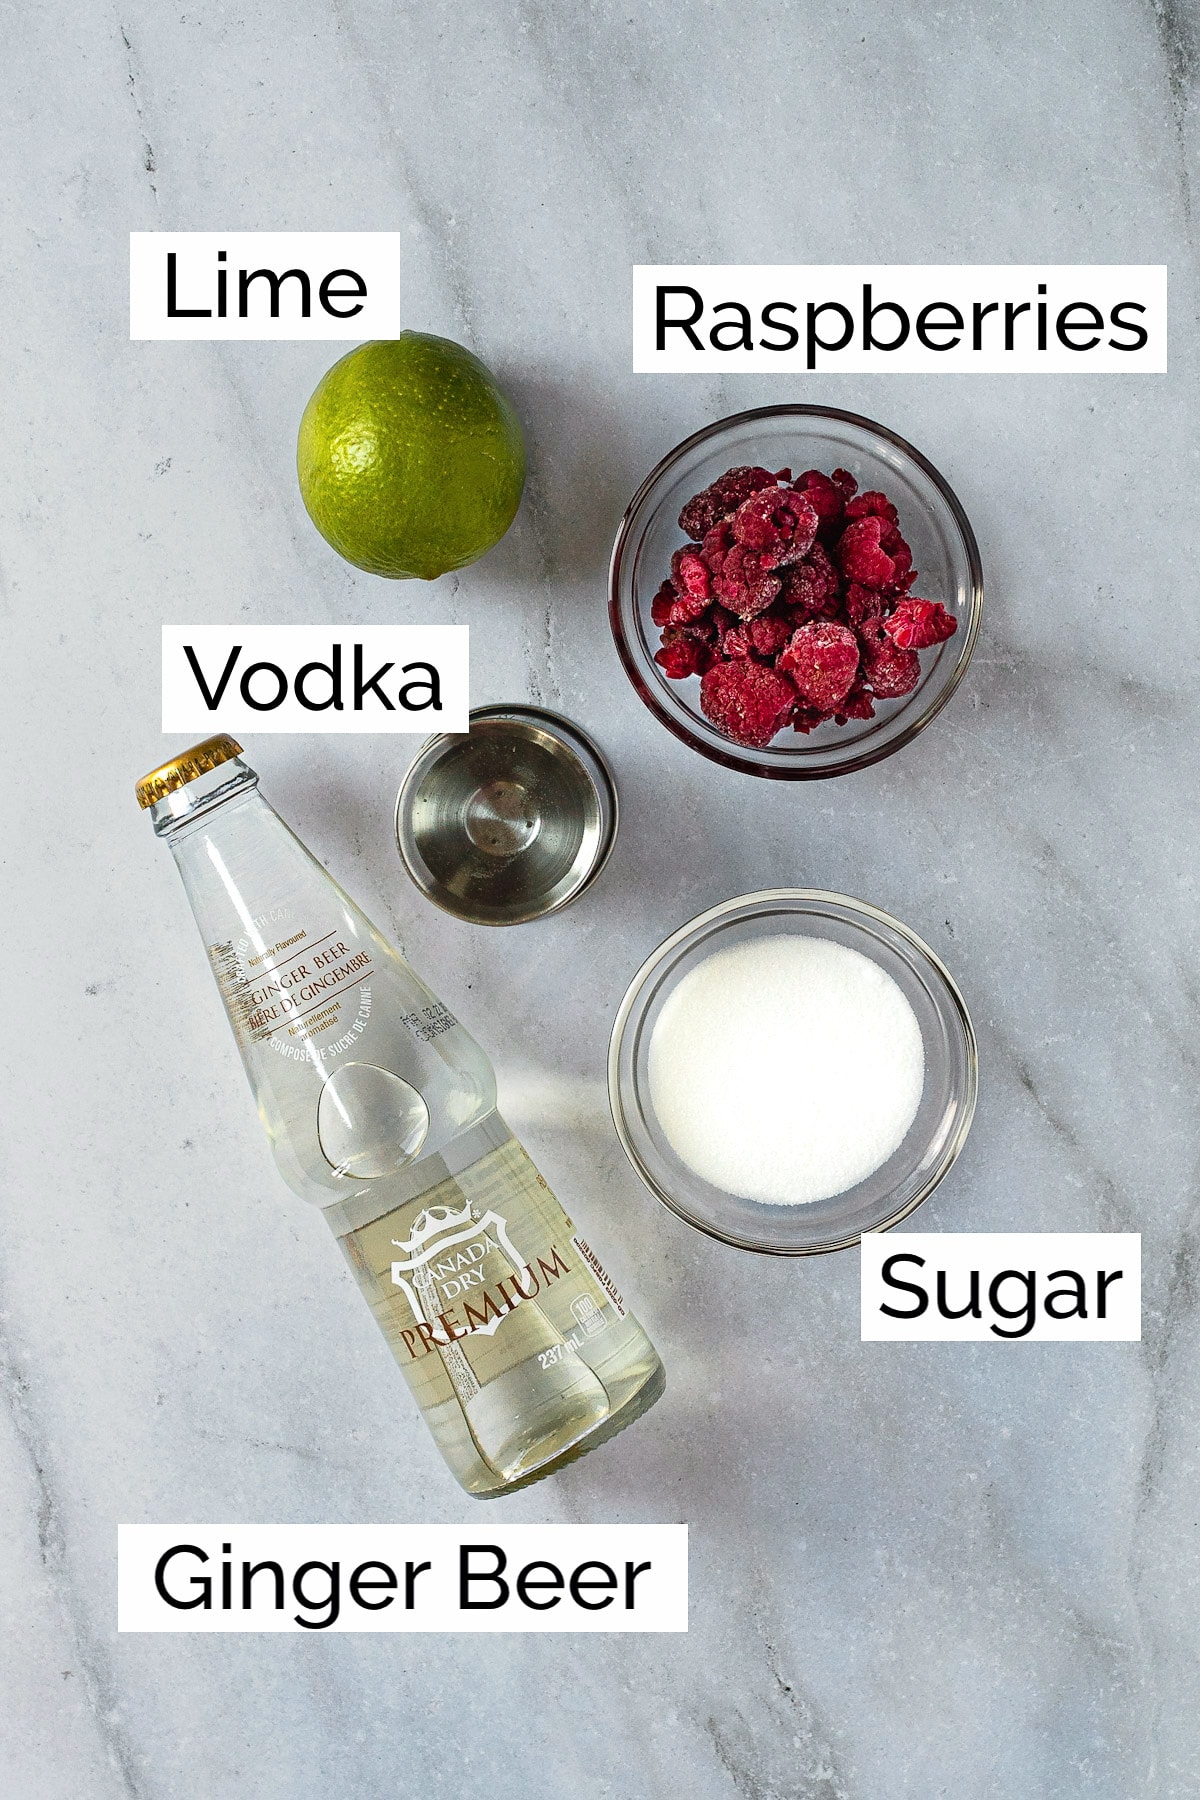 The ingredients needed for the raspberry mule.